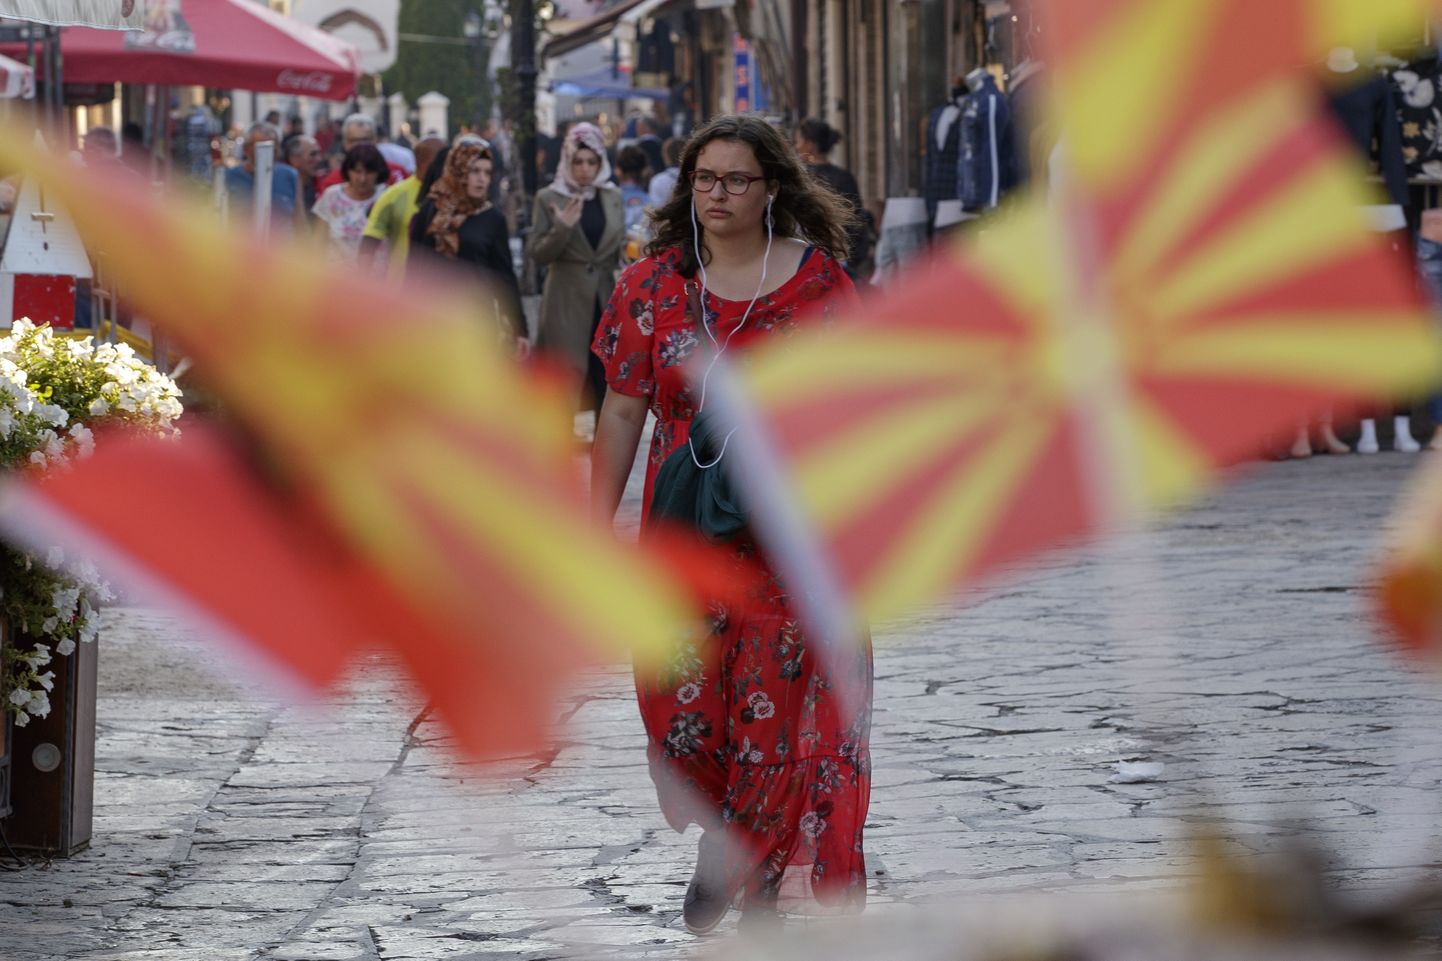 A Macedonian woman walks in the city, ahead of the Macedonia 'name deal' referendum, in the city of Skopje, The Former Yugoslav Republic of Macedonia, 29 September 2018. A referendum is scheduled for 30 September in Macedonia on whether to change the country's name to 'North Macedonia', to endorse a name deal in order to end a long running dispute between Macedonia and Greece and qualify for NATO membership.  EPA/VALDRIN XHEMAJ